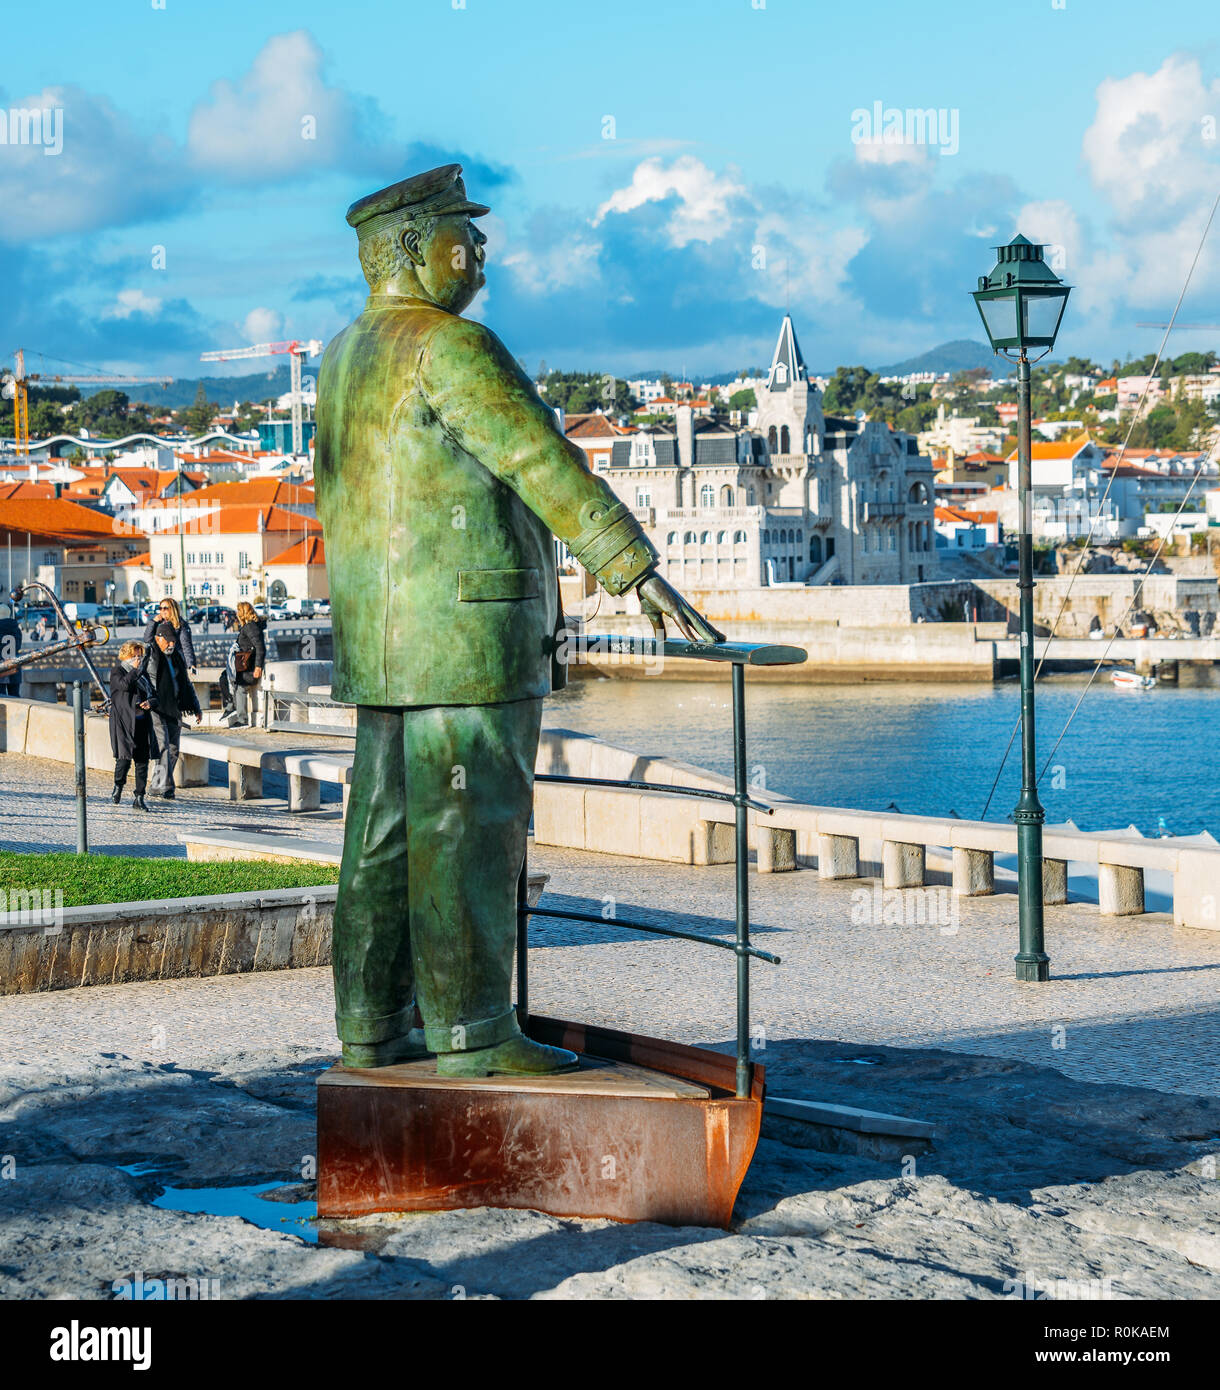 Statue of King Don Carlos in the Port of Cascais, Lisbon Region, Portugal Stock Photo